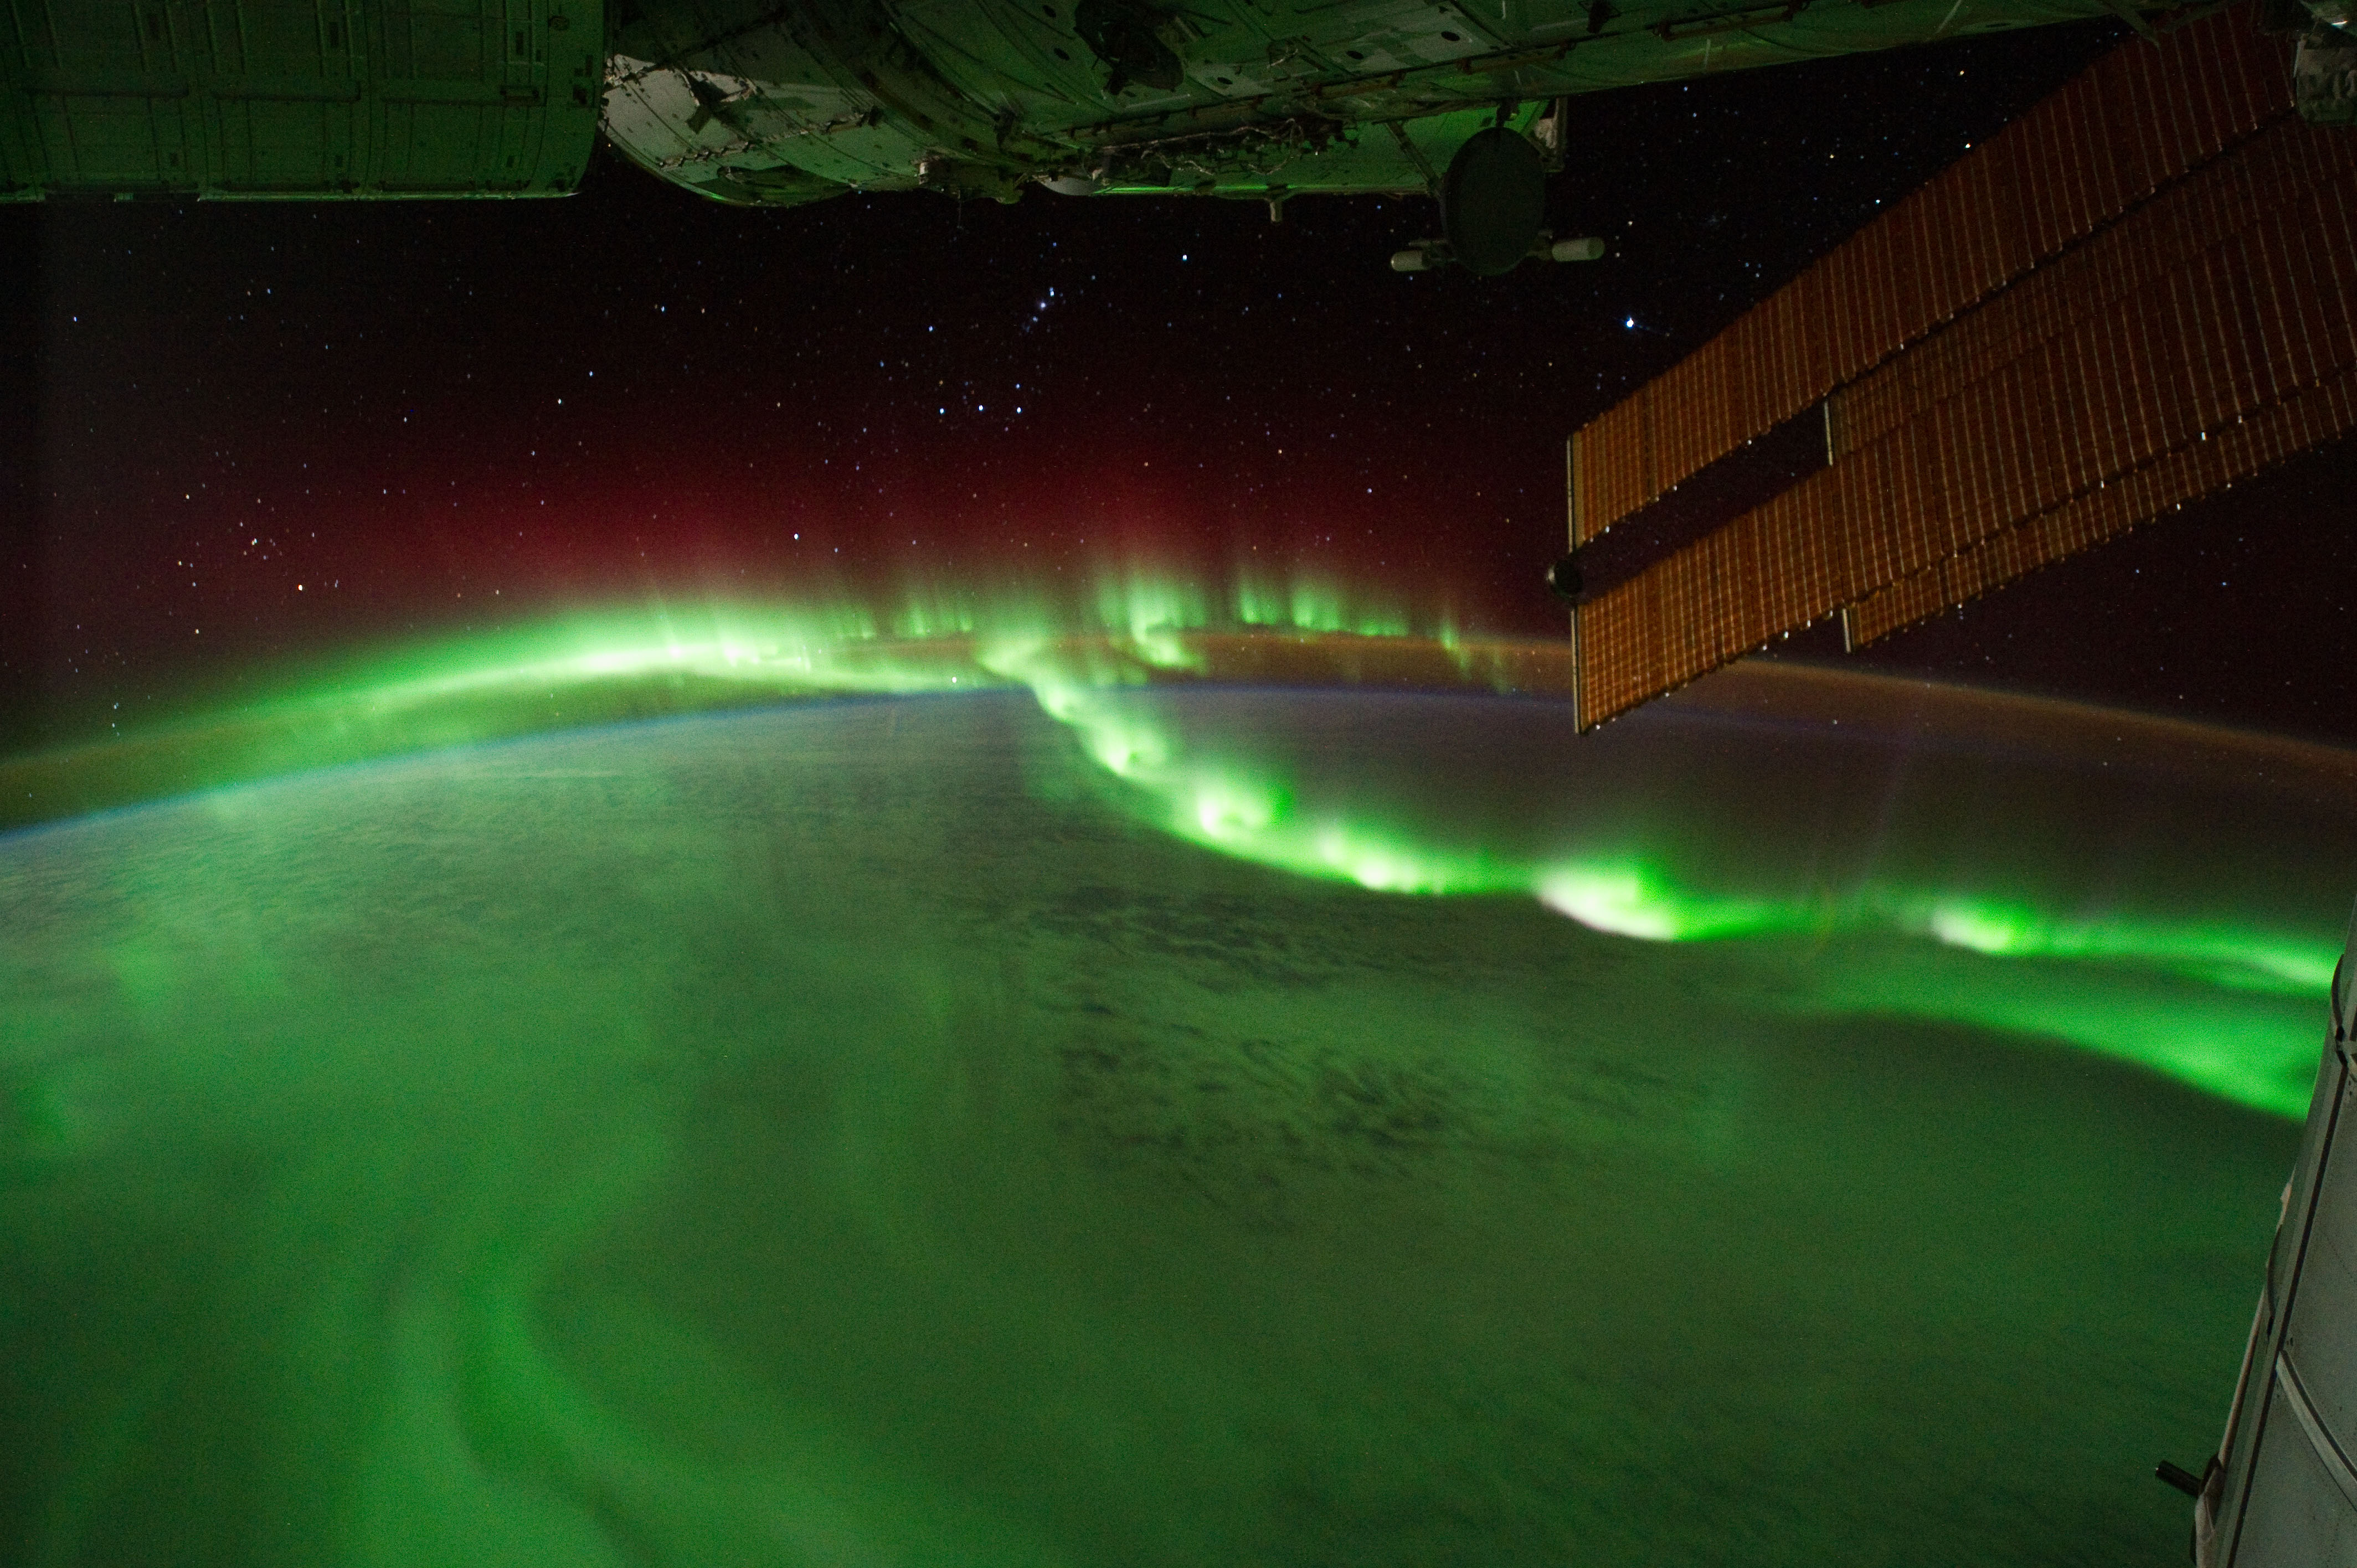 Astronaut aboard space station shares video of stunning aurora borealis and Moonrise over Earth